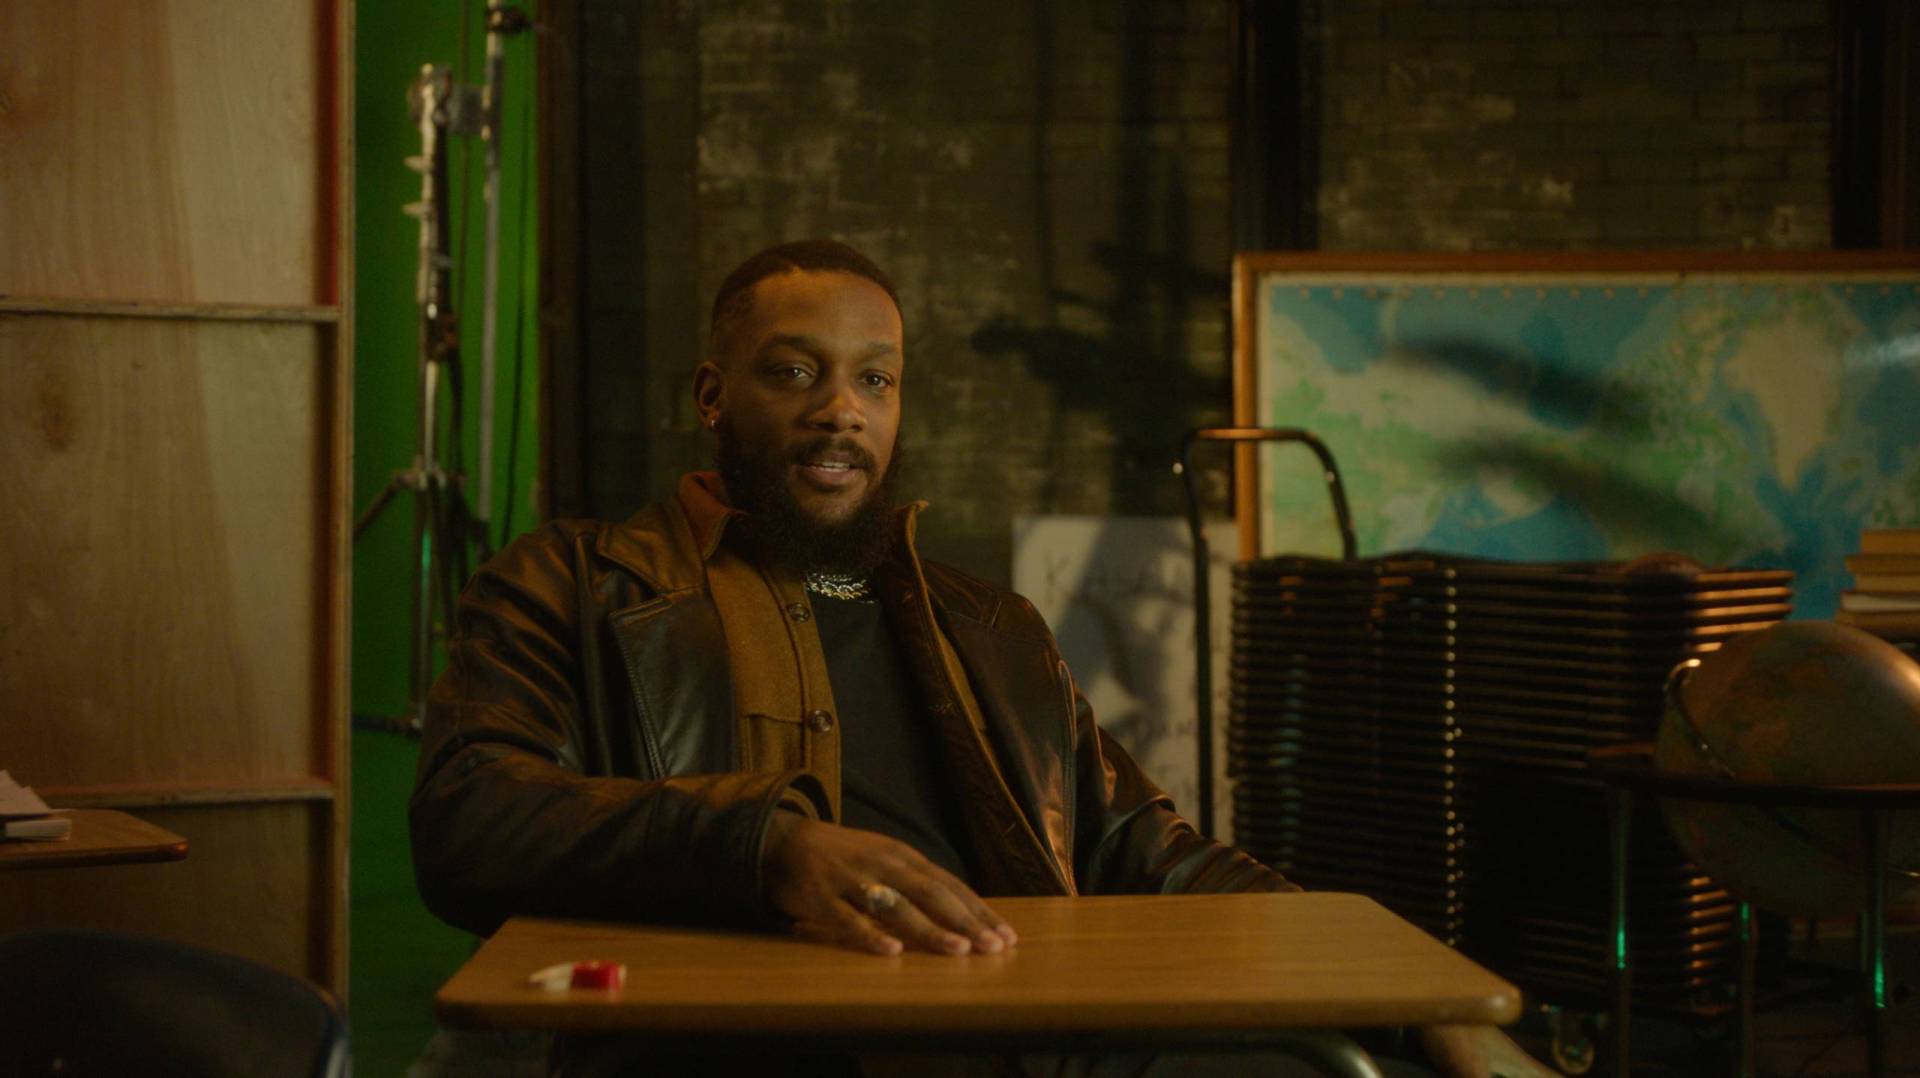 A Black man with a neat beard sits at a school desk in a backstage setting. He is wearing a brown leather jacket and sweater.